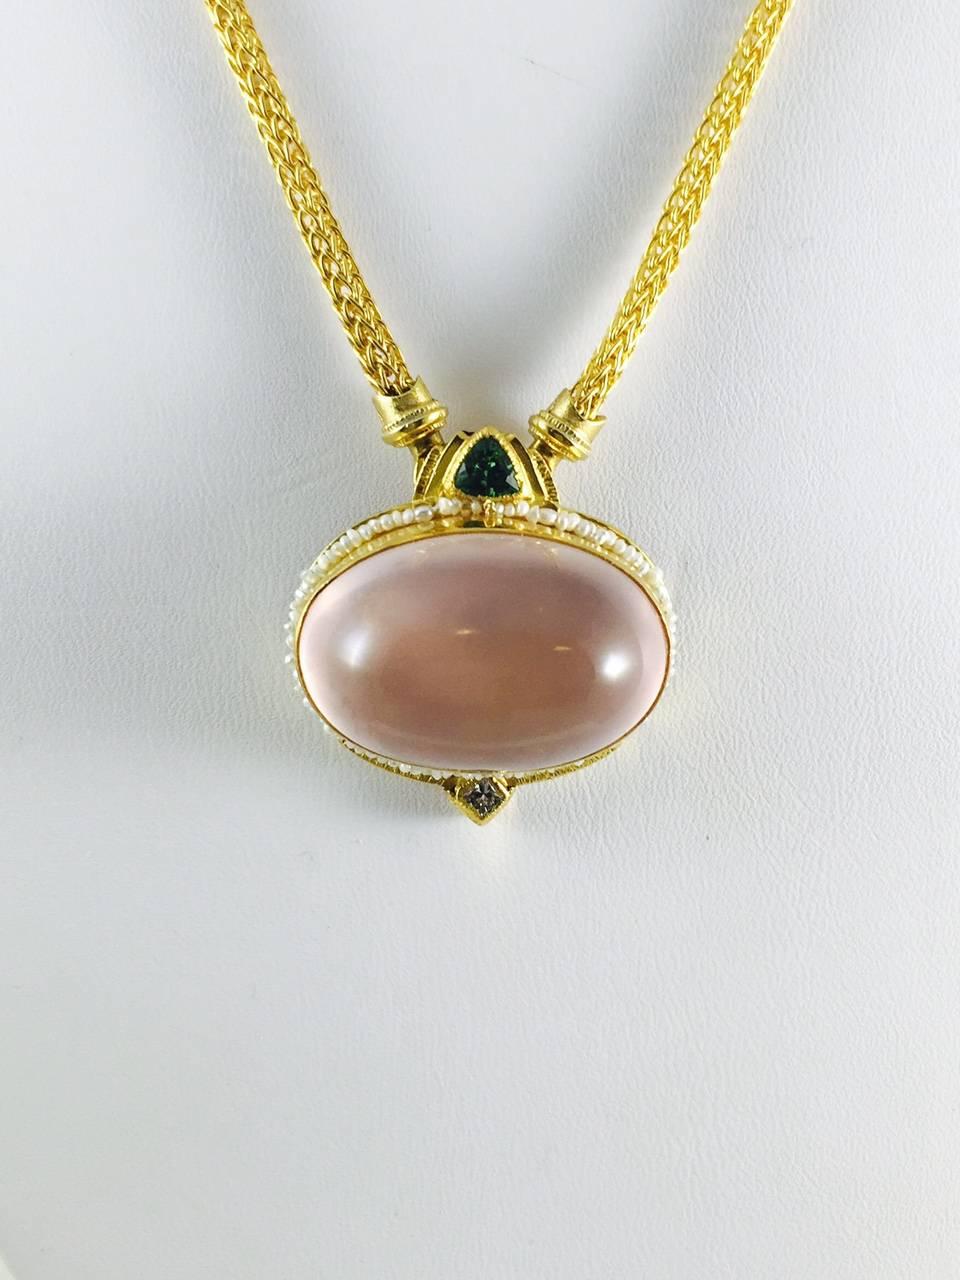 Unusual and stunning necklace!  22K yellow gold Wheat Chain holds a fabulous oval, bezel set, cabochon pink quartz surrounded by tiny seed pearls in a custom created 24K yellow gold frame.  Atop the frame sits a bezel set trillion green tourmaline. 